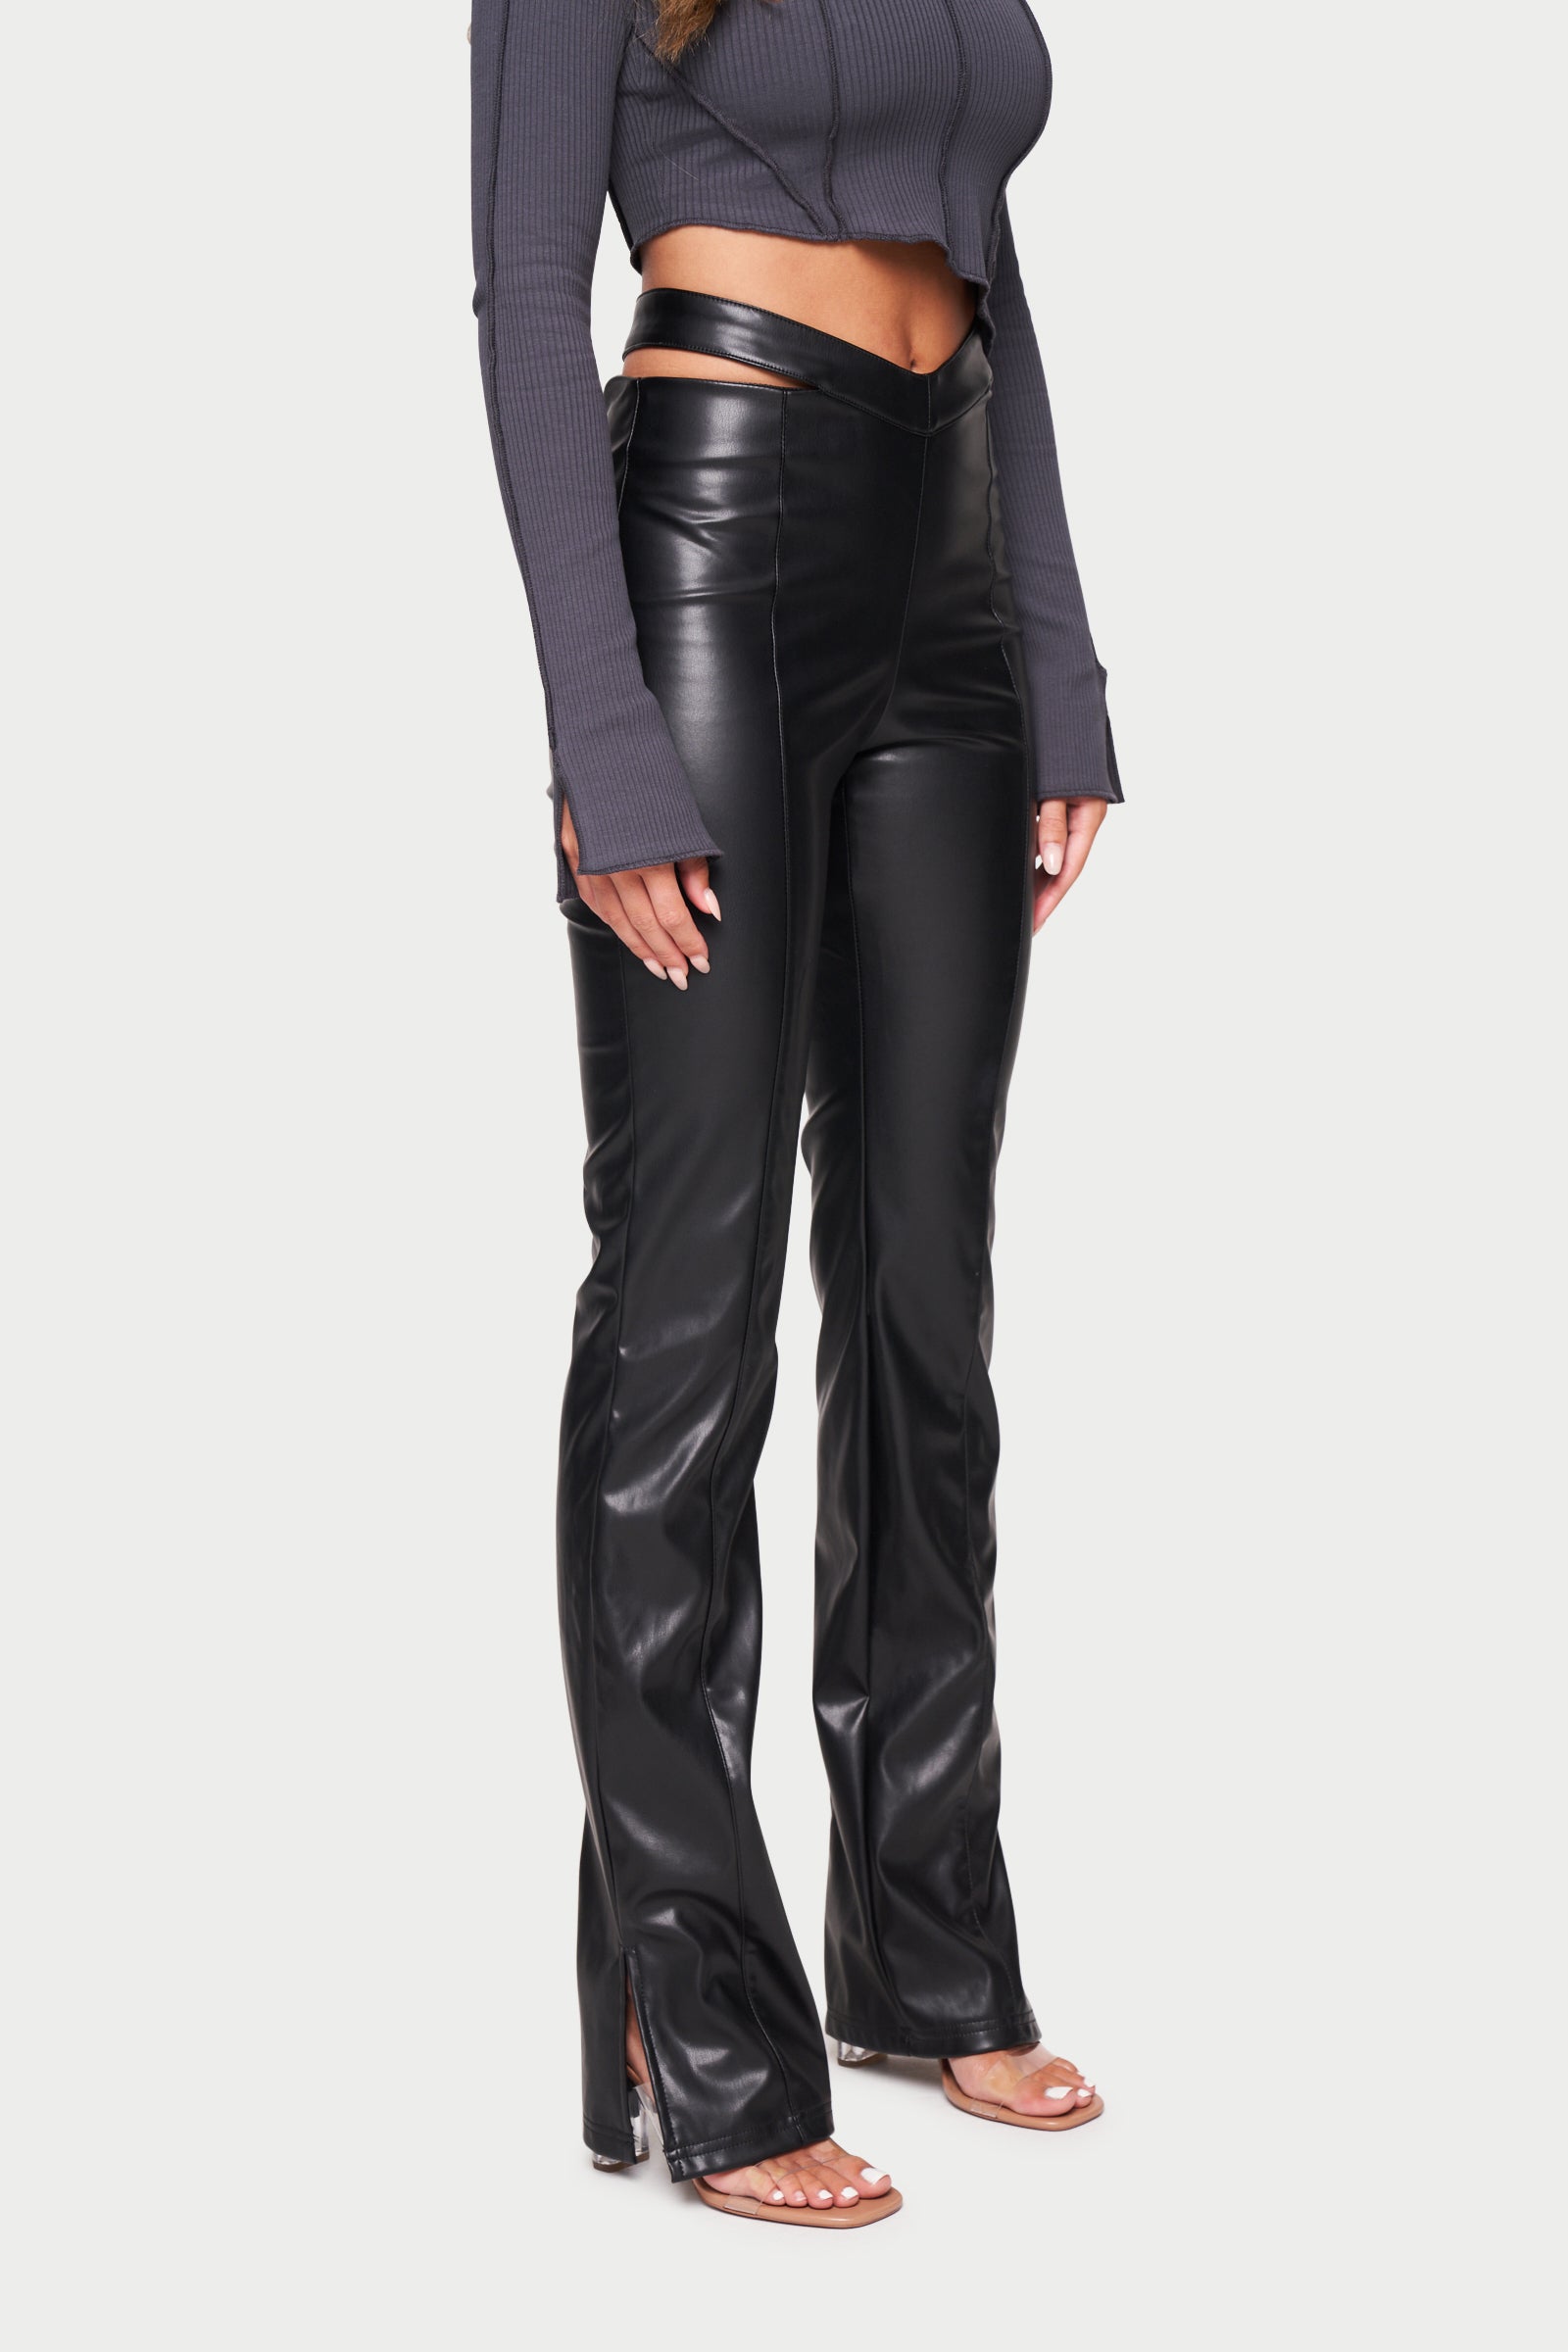 fake leather trousers uk